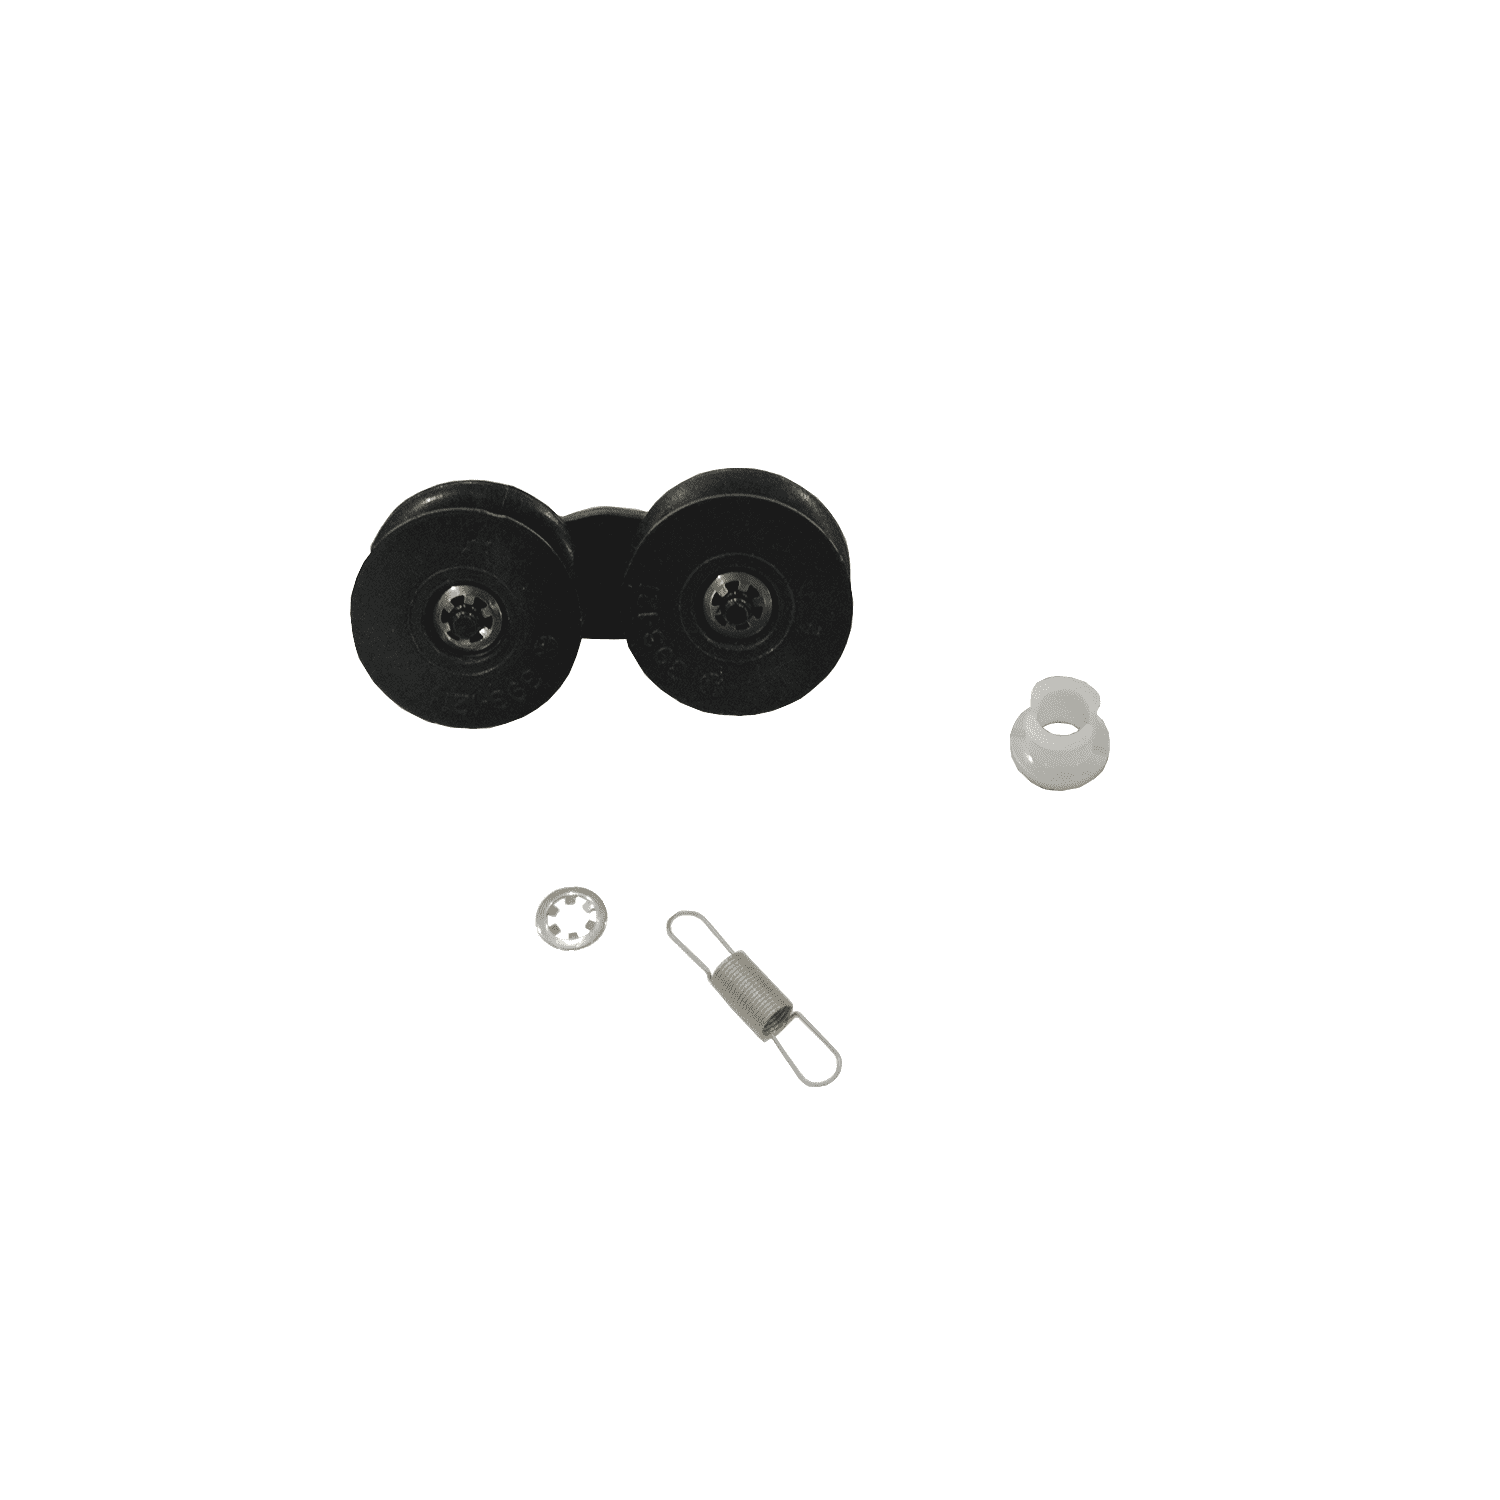 Chain Tensioner Kit (39-120): Ensures Smooth and Reliable Performance